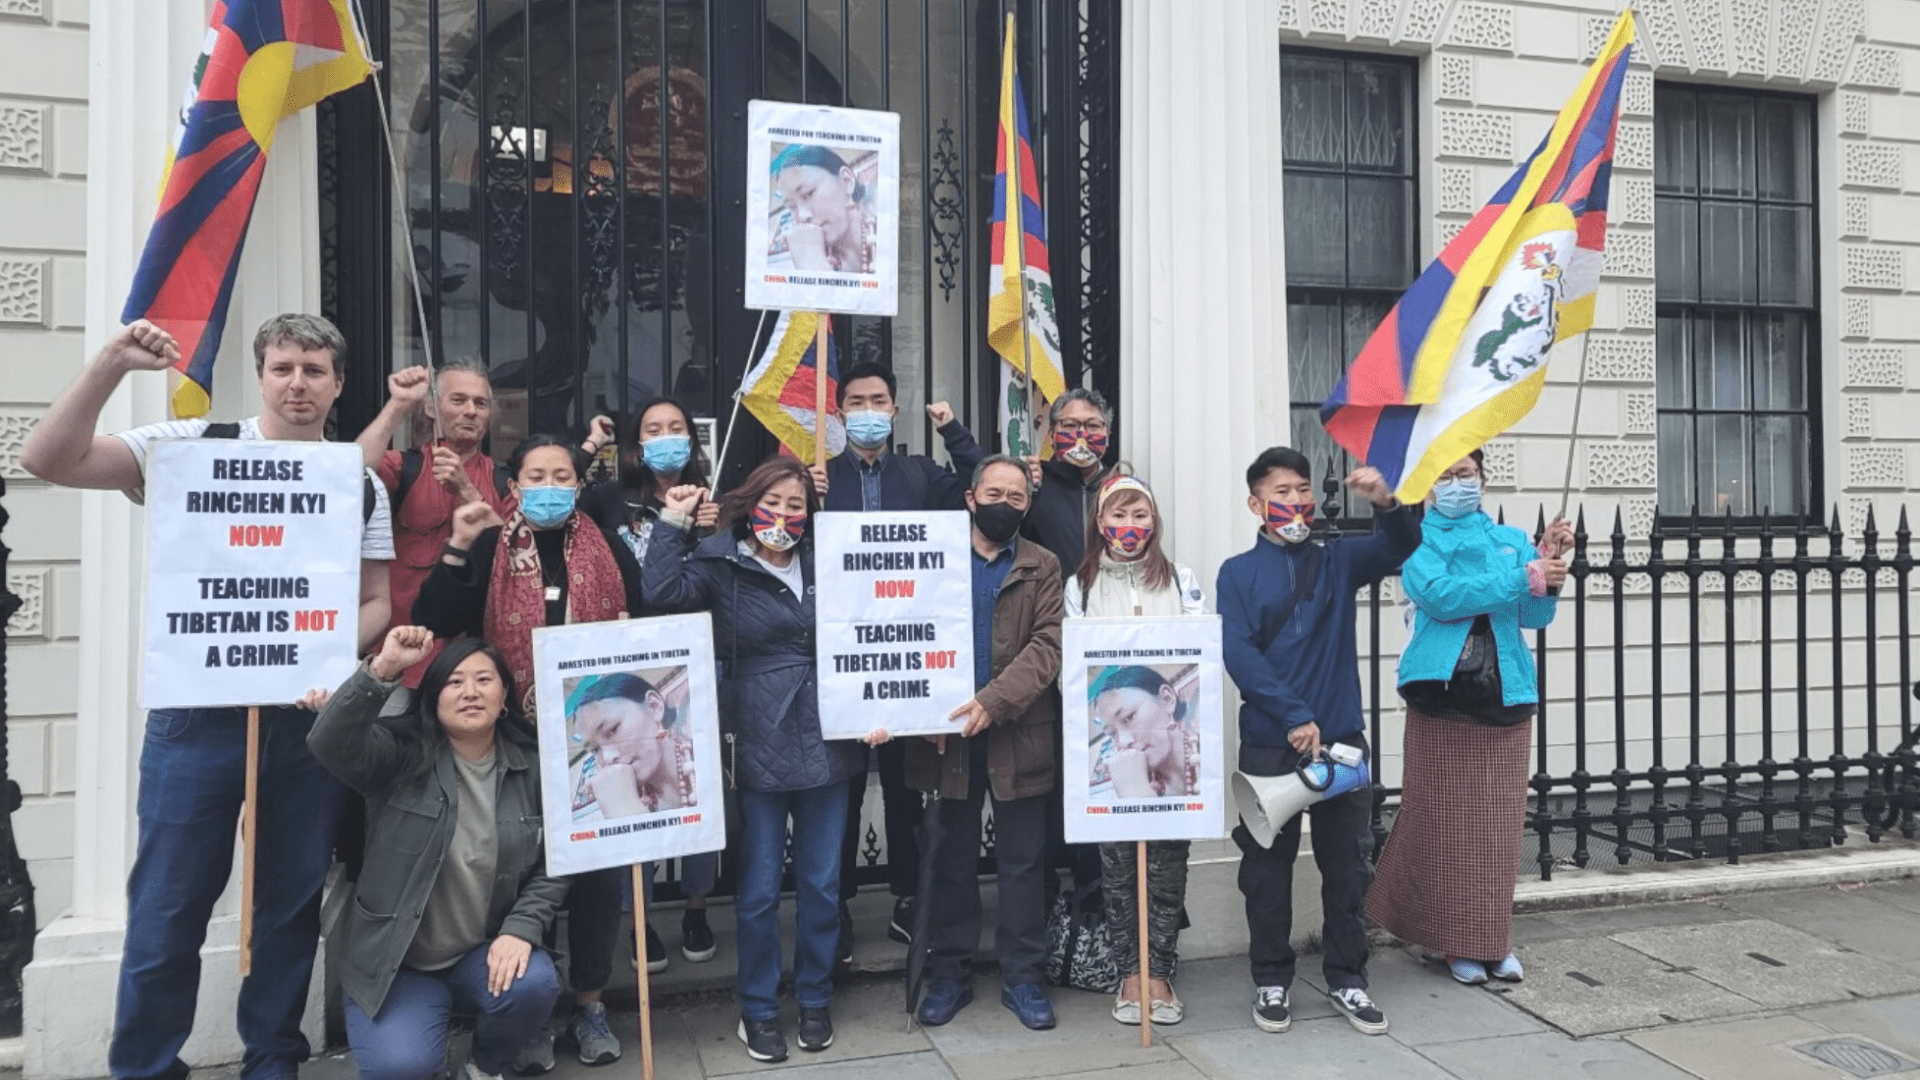 Activists hold a protest demanding the release of Rinchen Kyi